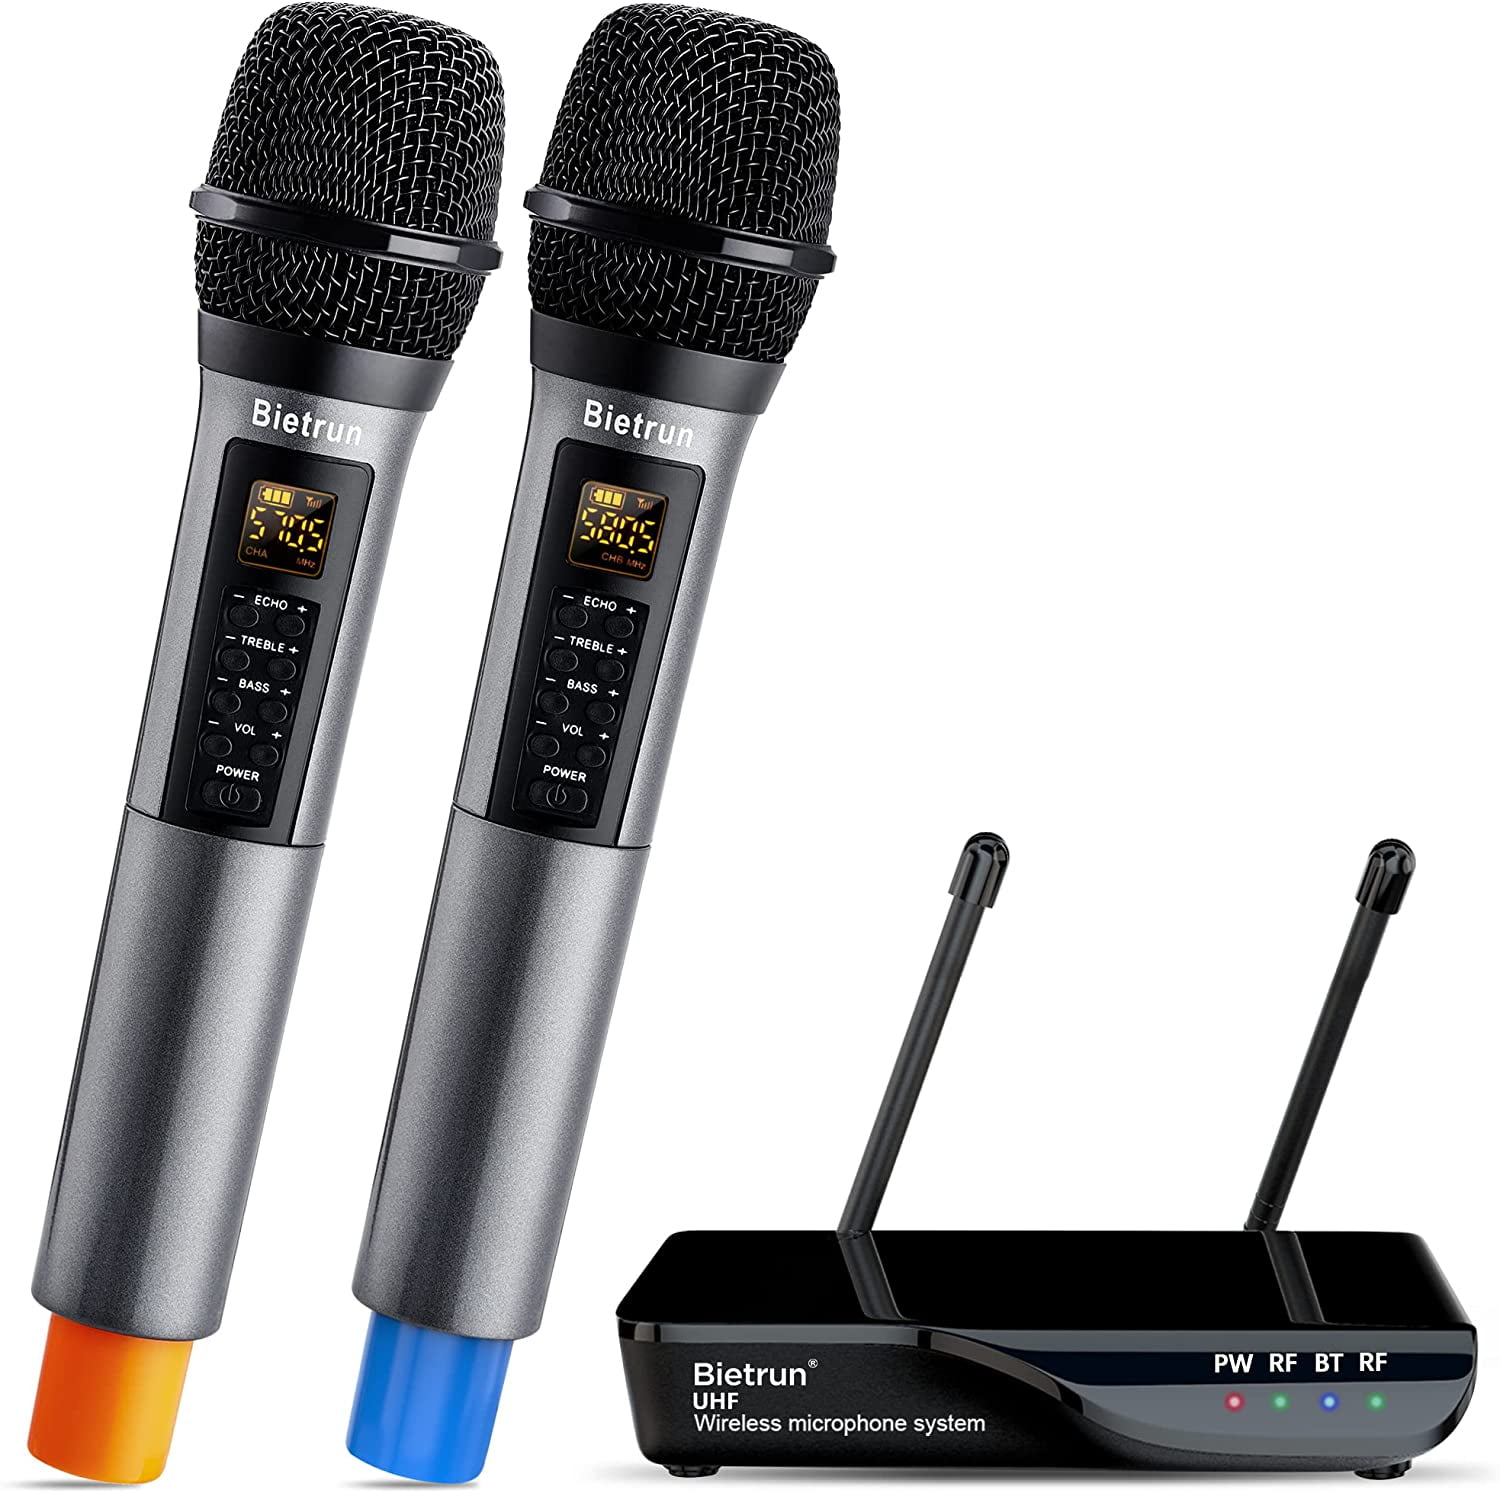 Bietrun Wireless Microphone, UHF Wireless Dual Handheld Dynamic  Omnidirectional Microphone System Set 160ft Range, 6.35 Mm (1/4 Inches)  (Multicolor)